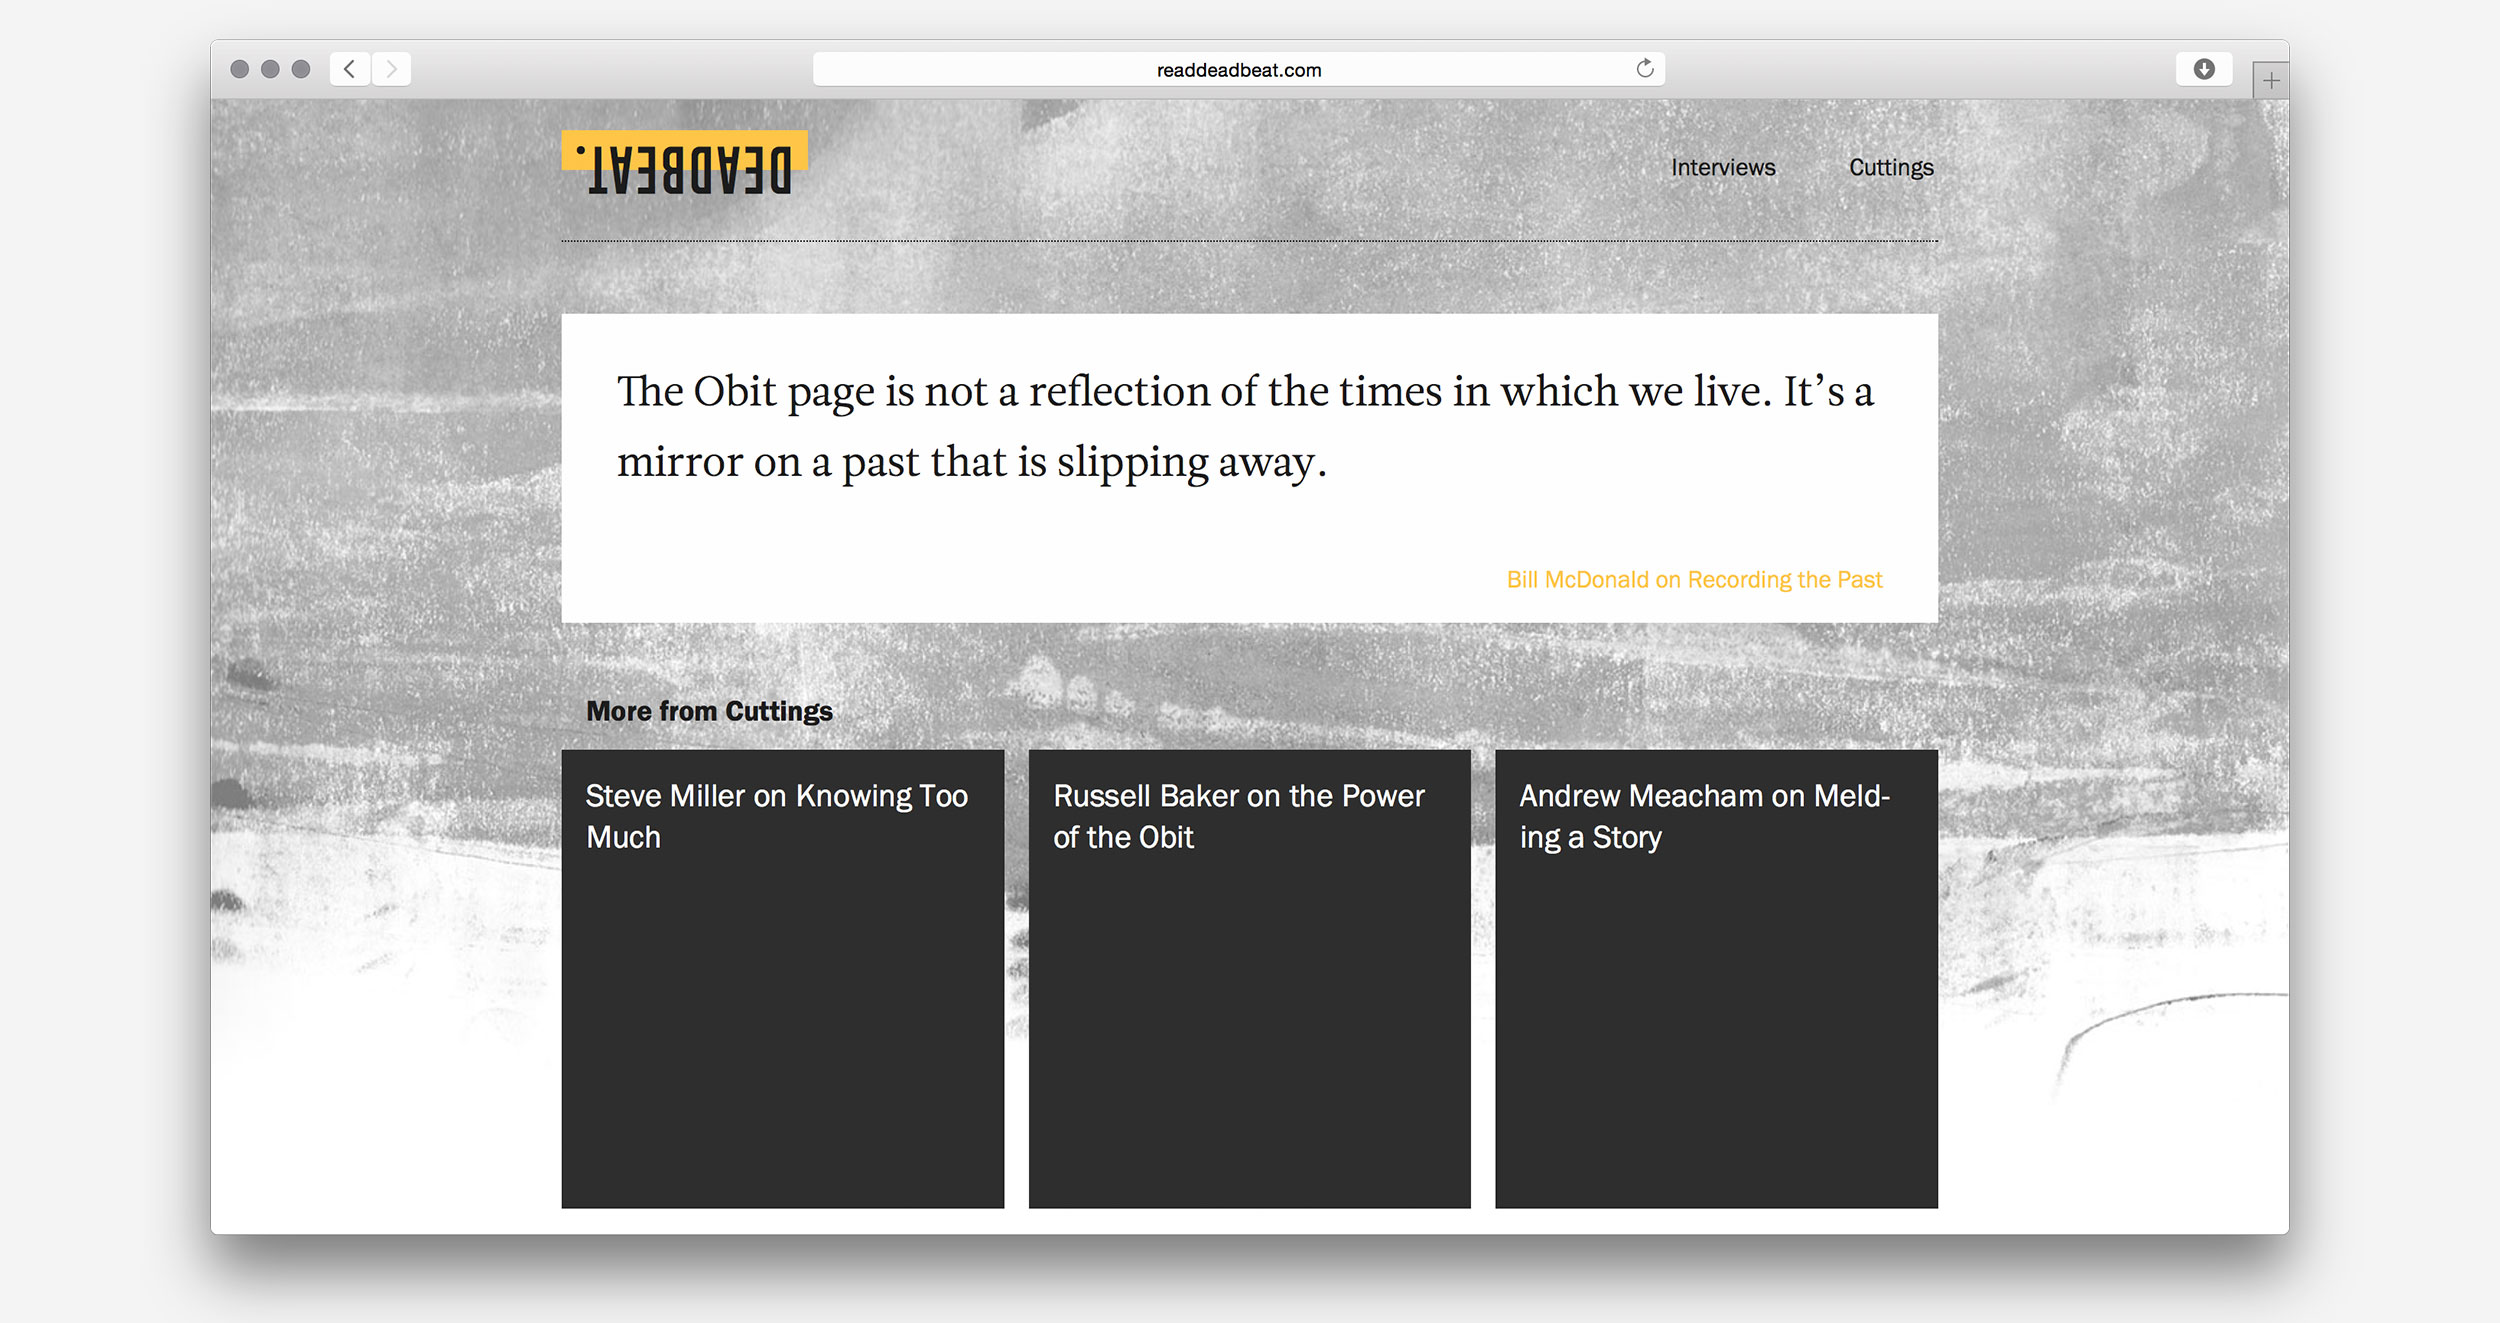 The Clippings section of the website